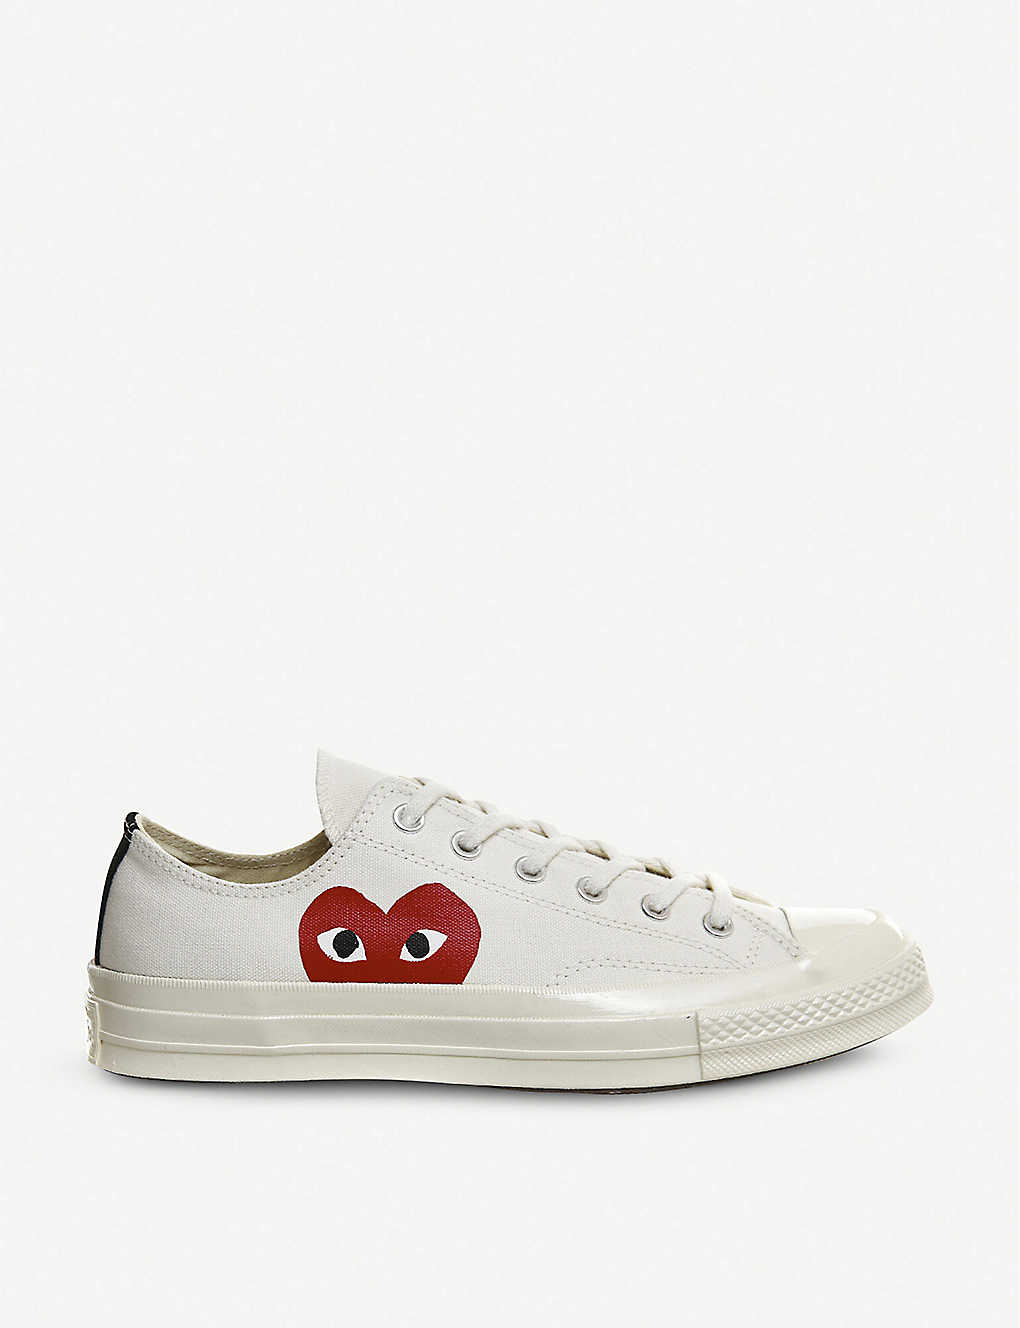 Converse 70s x play cdg trainers